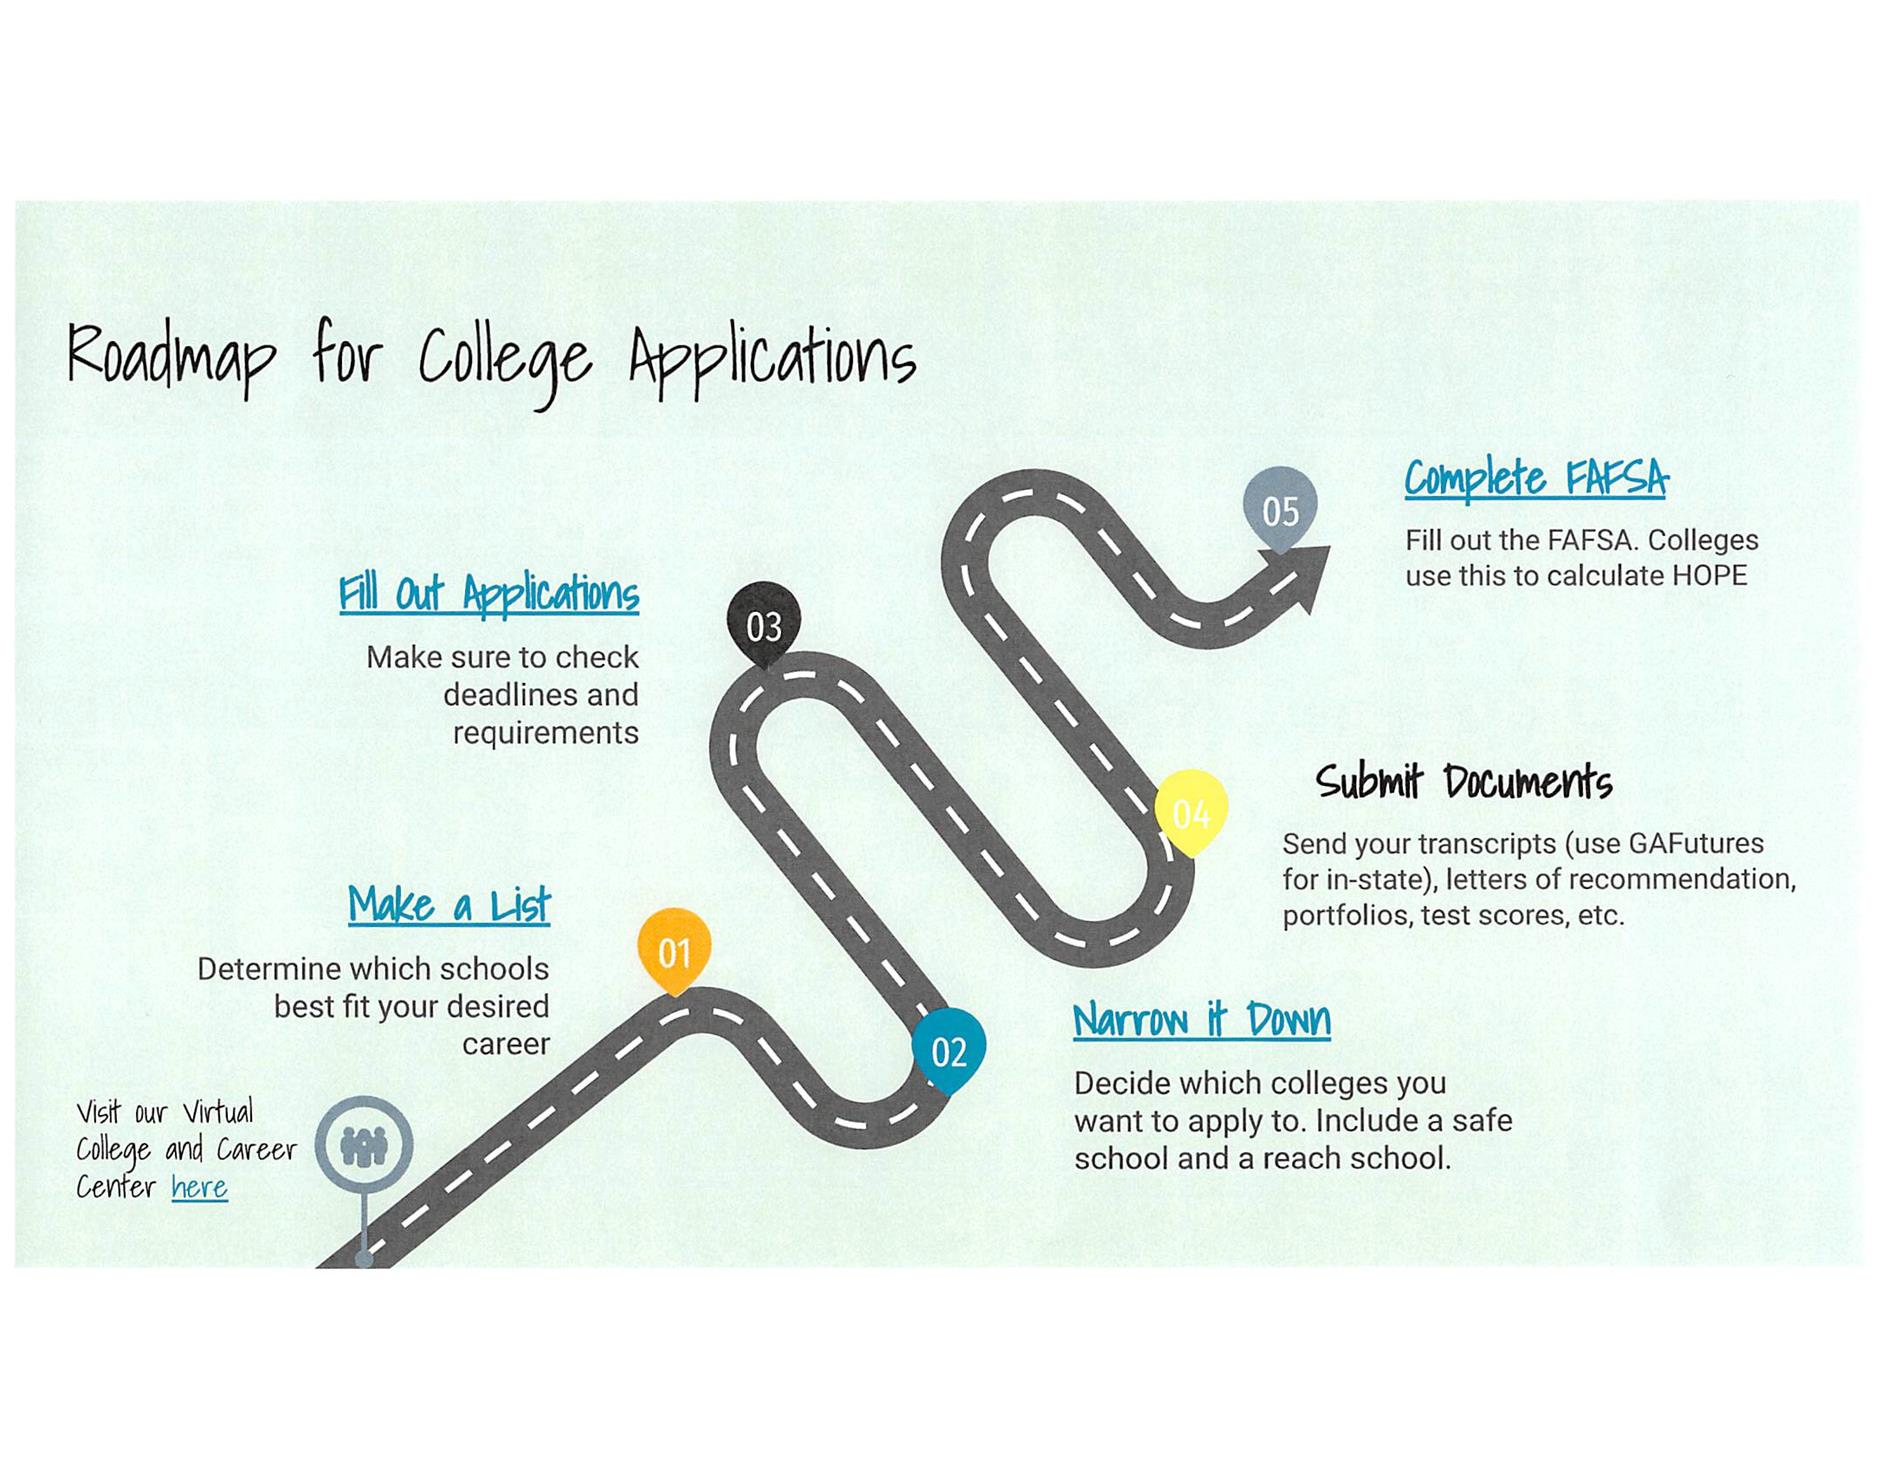 Roadmap for College Applications